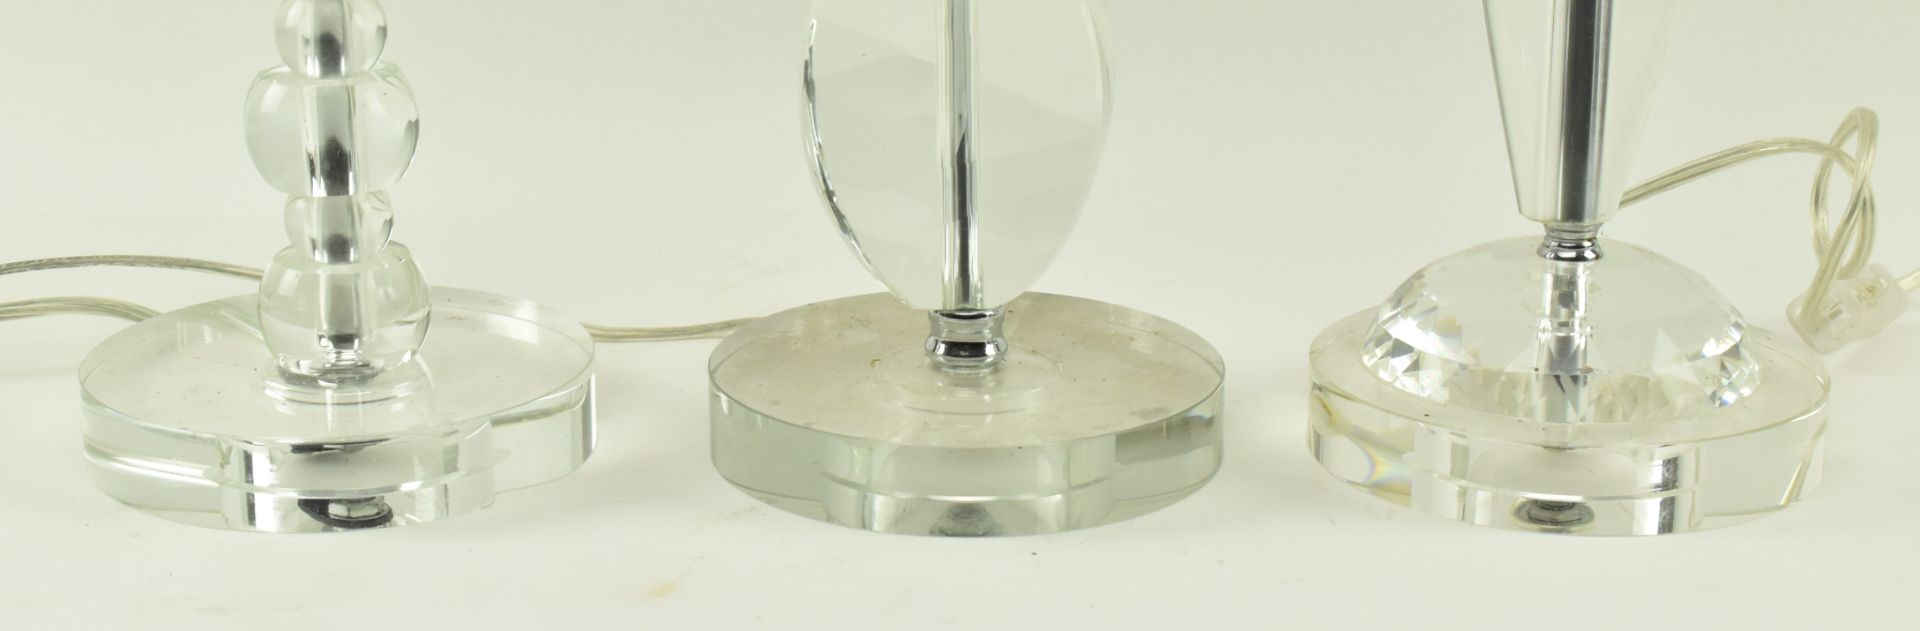 HARLEQUIN SET OF THREE CONTEMPORARY CLEAR GLASS DESK LAMPS - Image 5 of 6